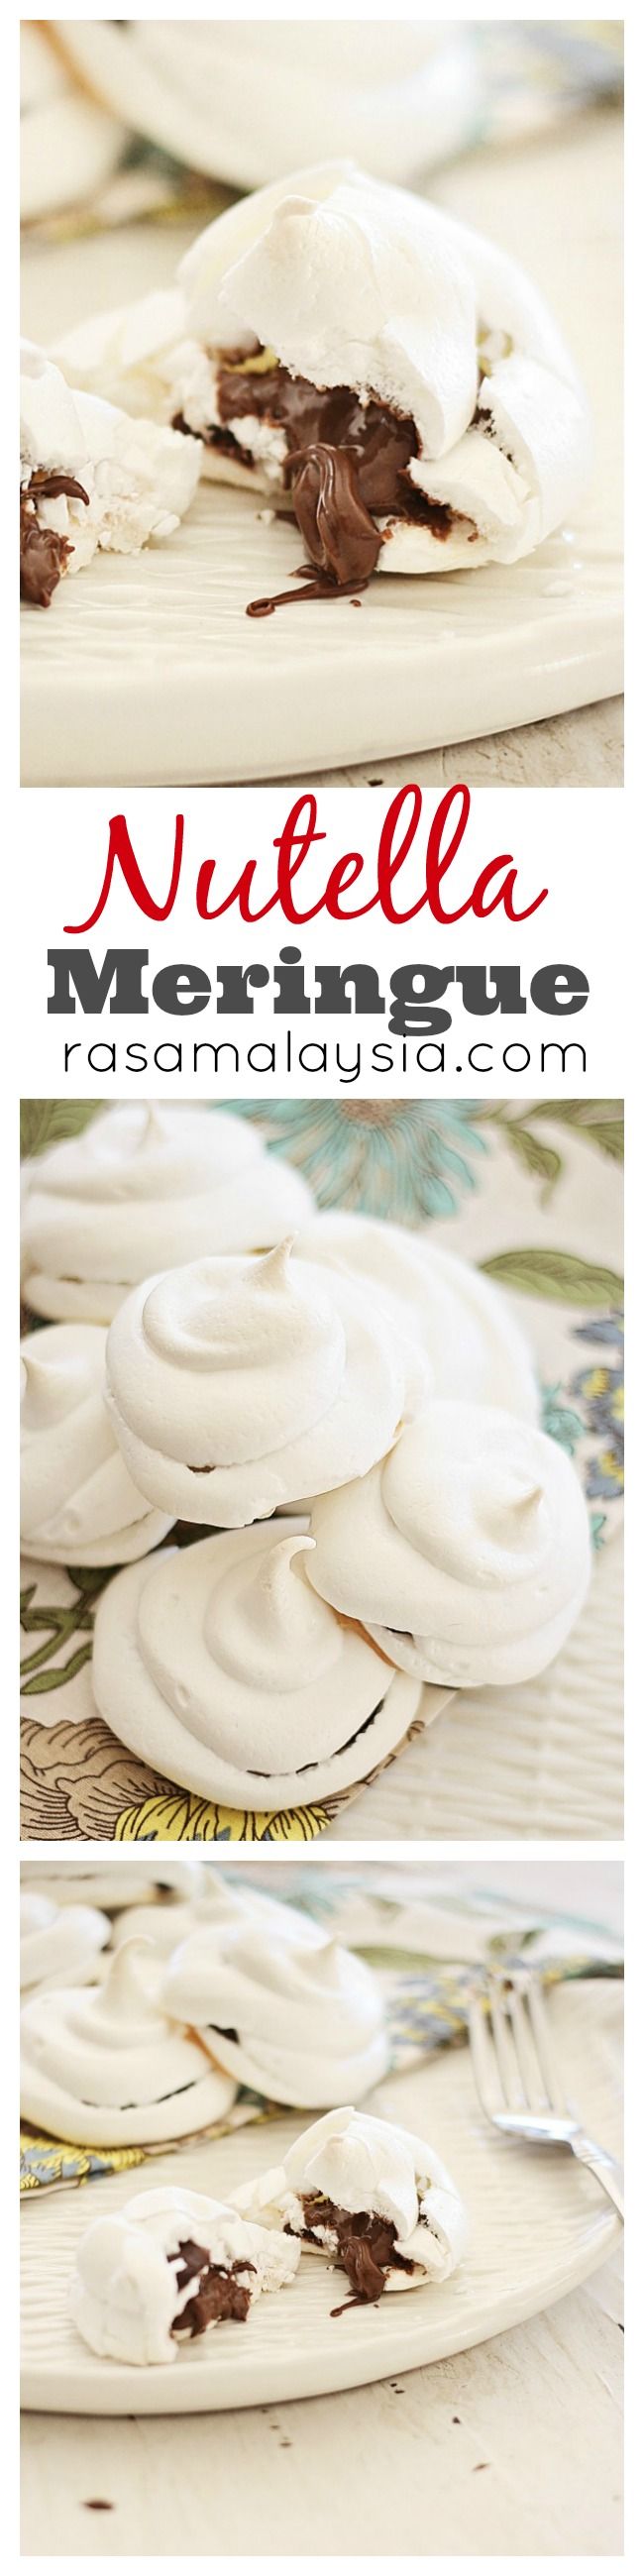 Light and sweet Nutella Meringue. Every bite is filled with thick gooey Nutella. Easy Nutella Meringue recipe that anyone can make at home | rasamalaysia.com